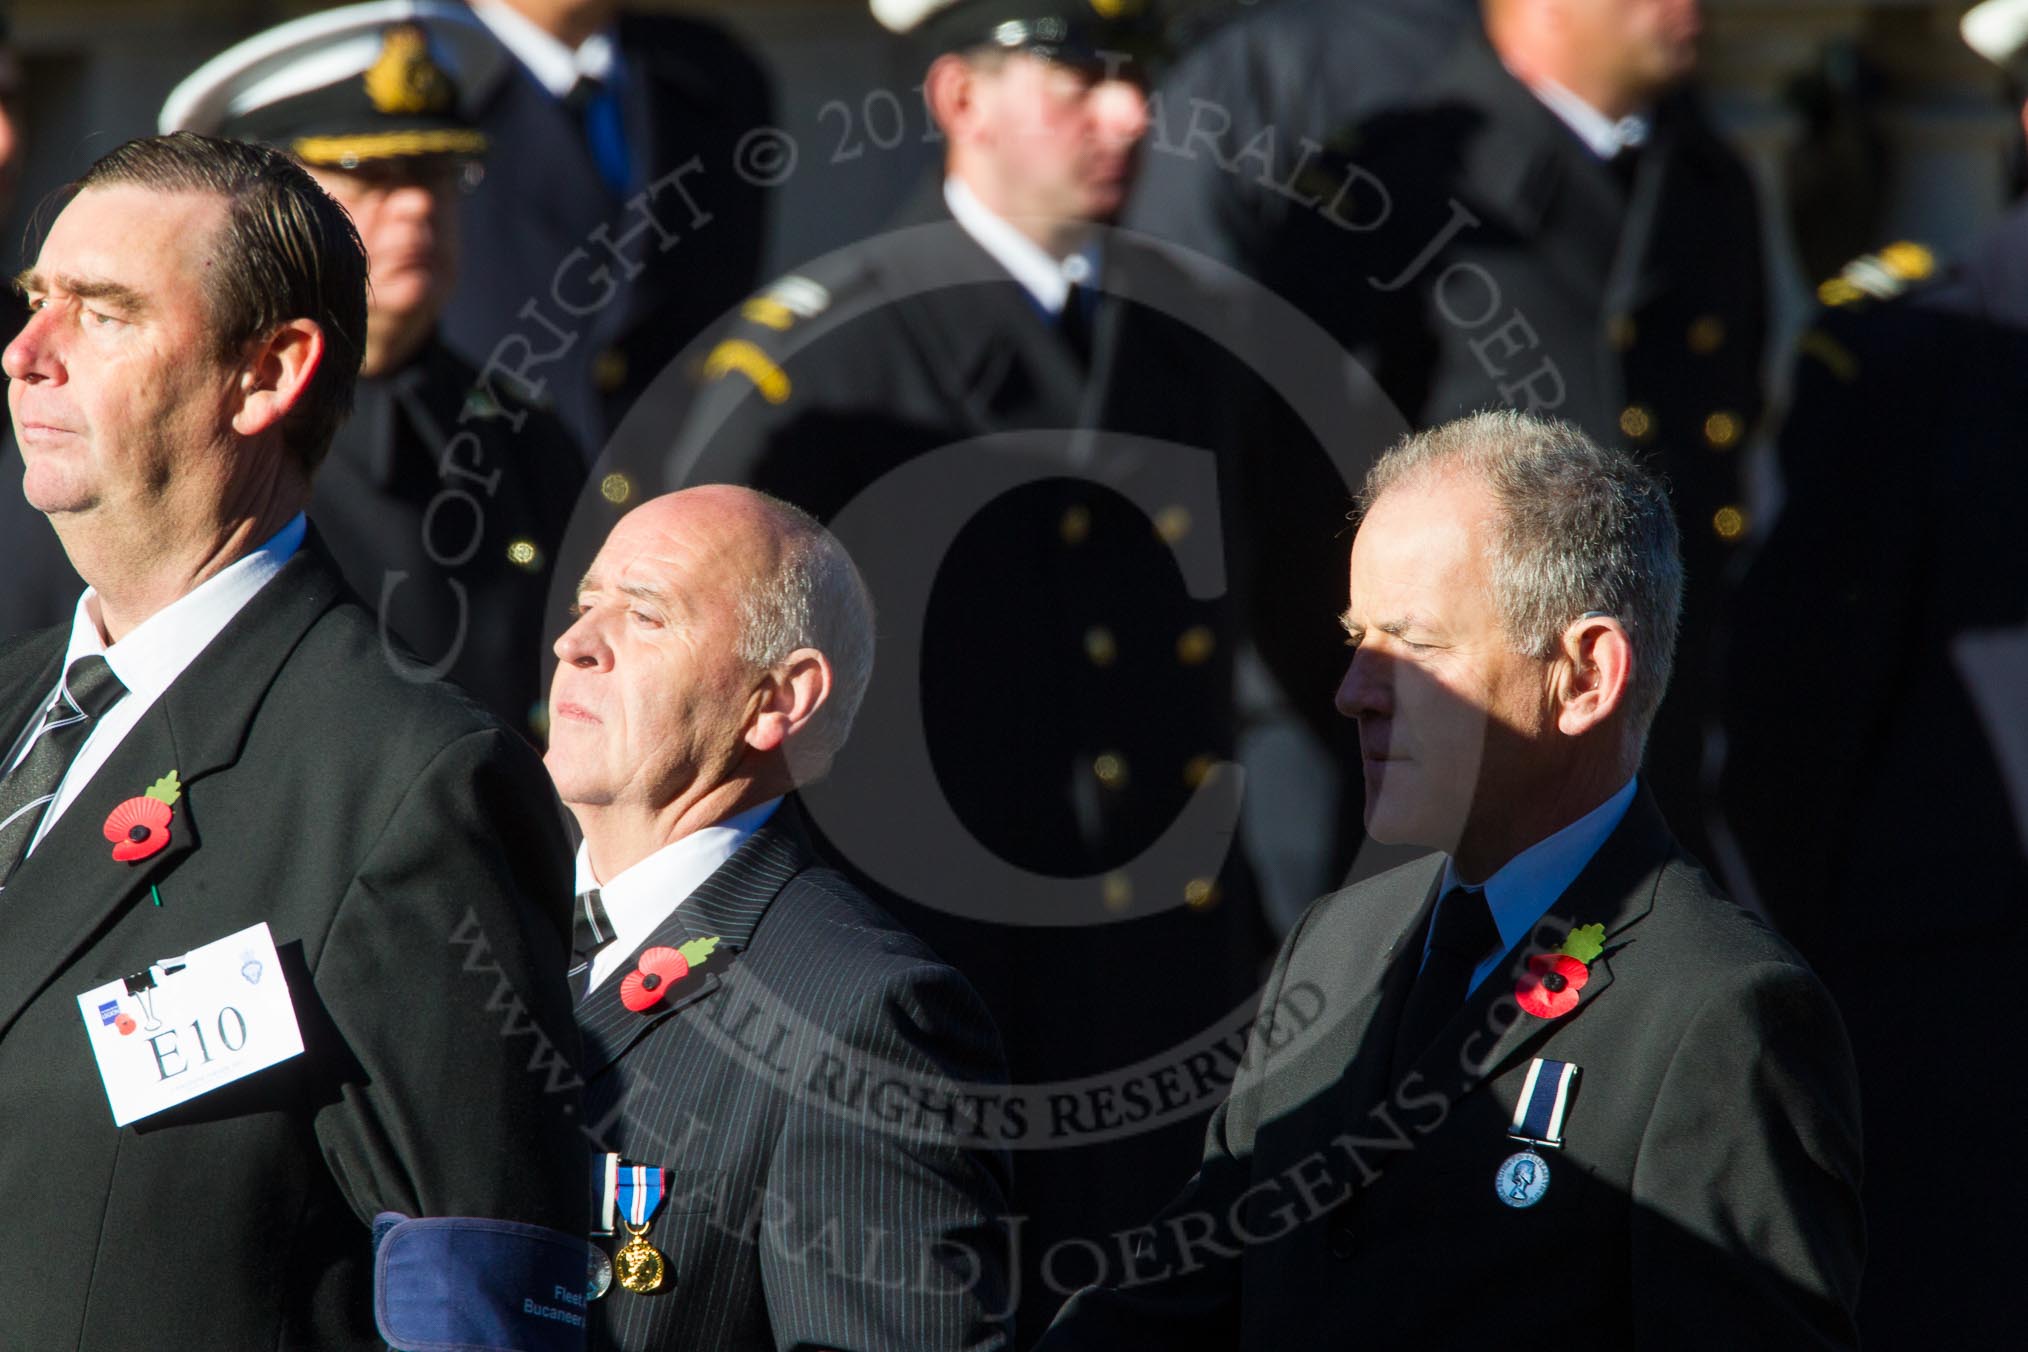 Remembrance Sunday Cenotaph March Past 2013: E10 - Fleet Air Arm Bucaneer Association..
Press stand opposite the Foreign Office building, Whitehall, London SW1,
London,
Greater London,
United Kingdom,
on 10 November 2013 at 11:45, image #451